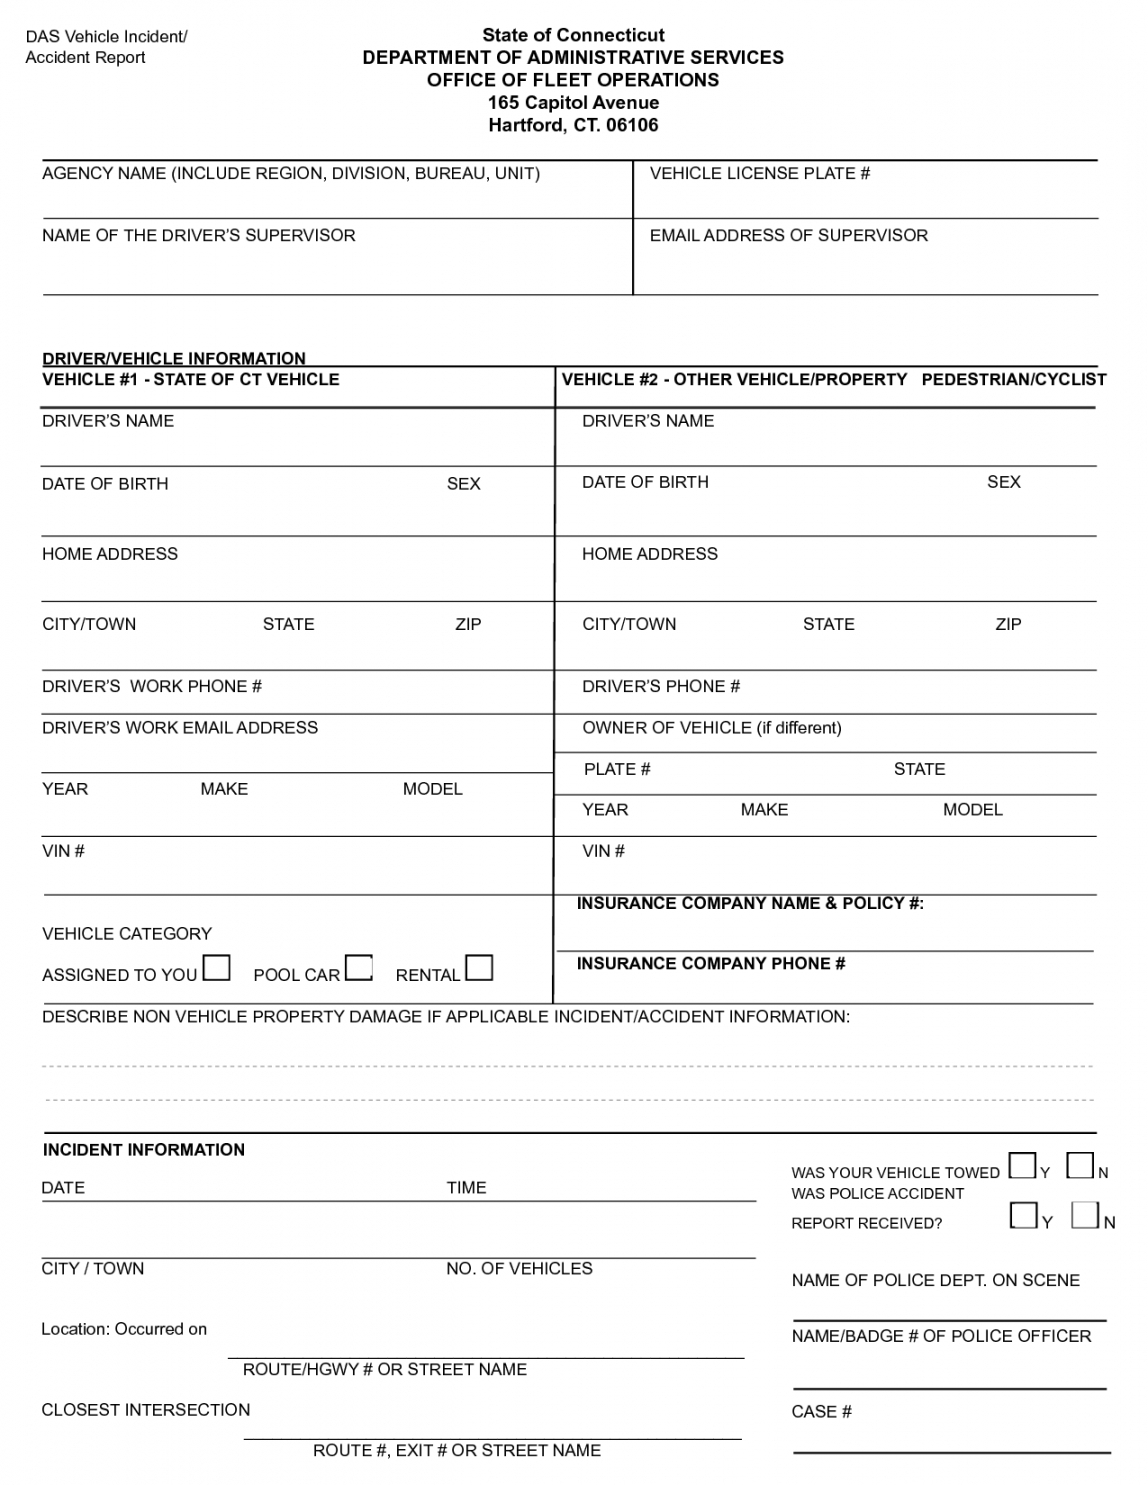 Vehicle Incident Report Template For Motor Vehicle Accident Report Form Template